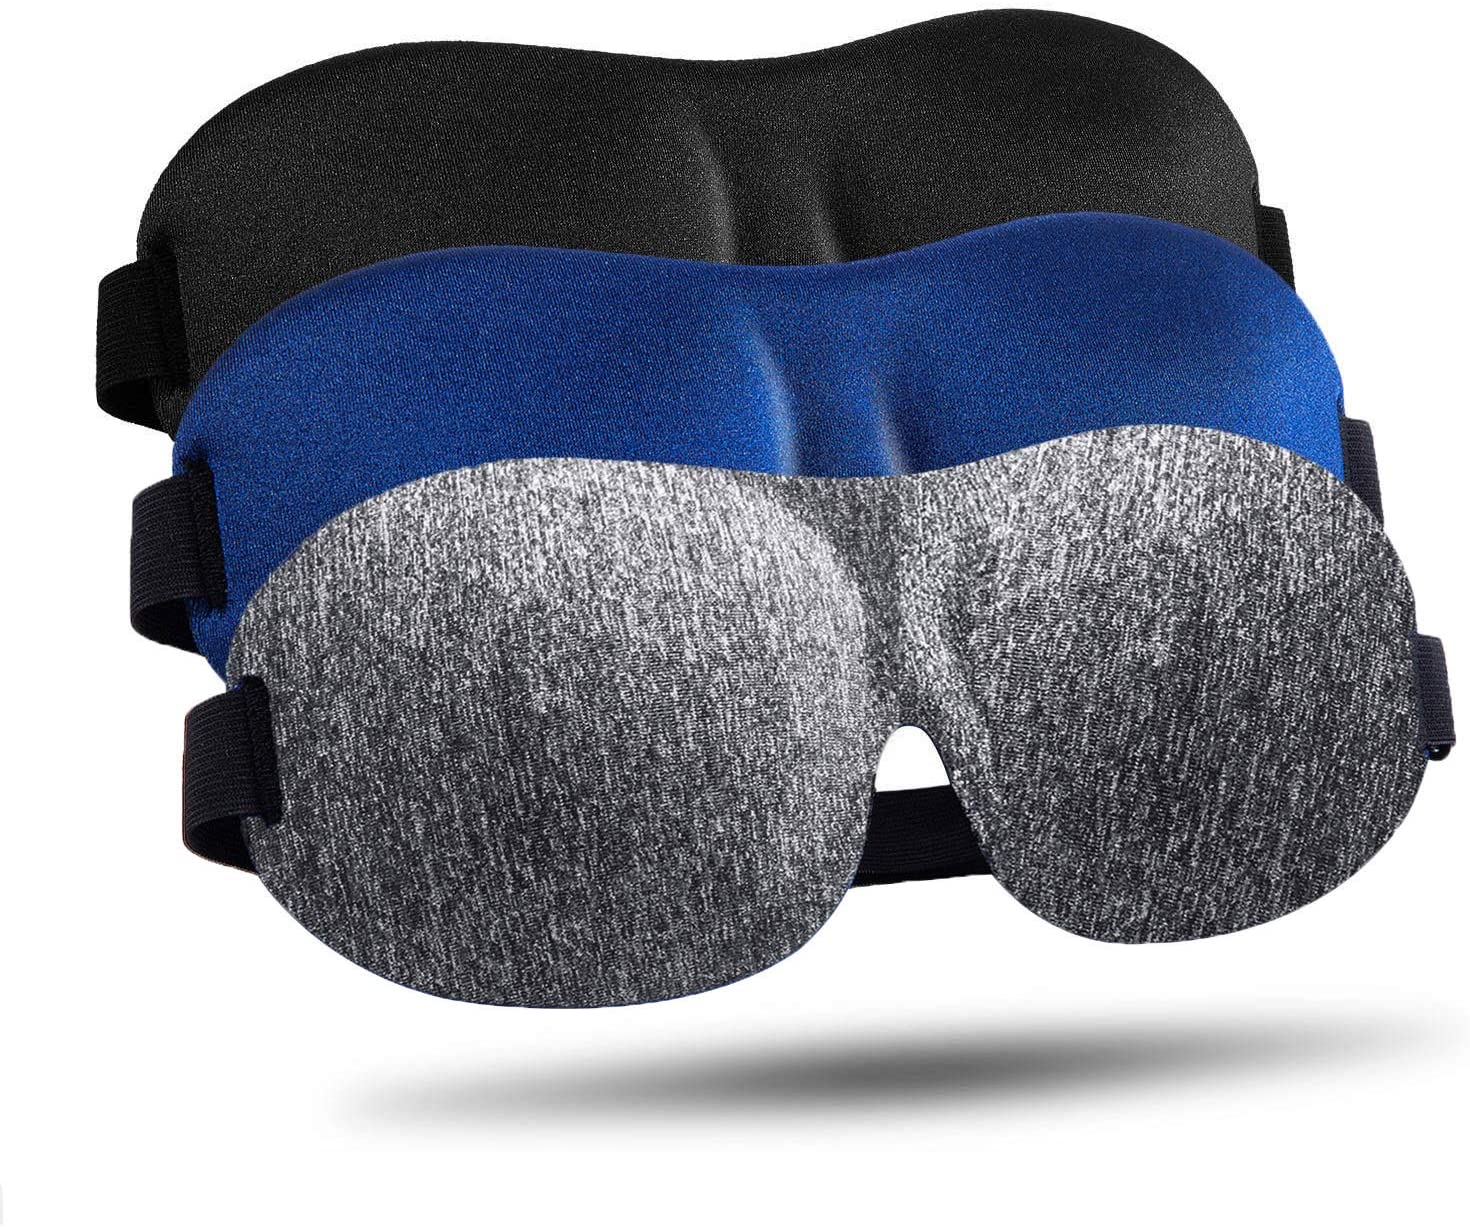 UPGRADED 3D Eye Mask for Sleeping BEST-SELLING IN USA